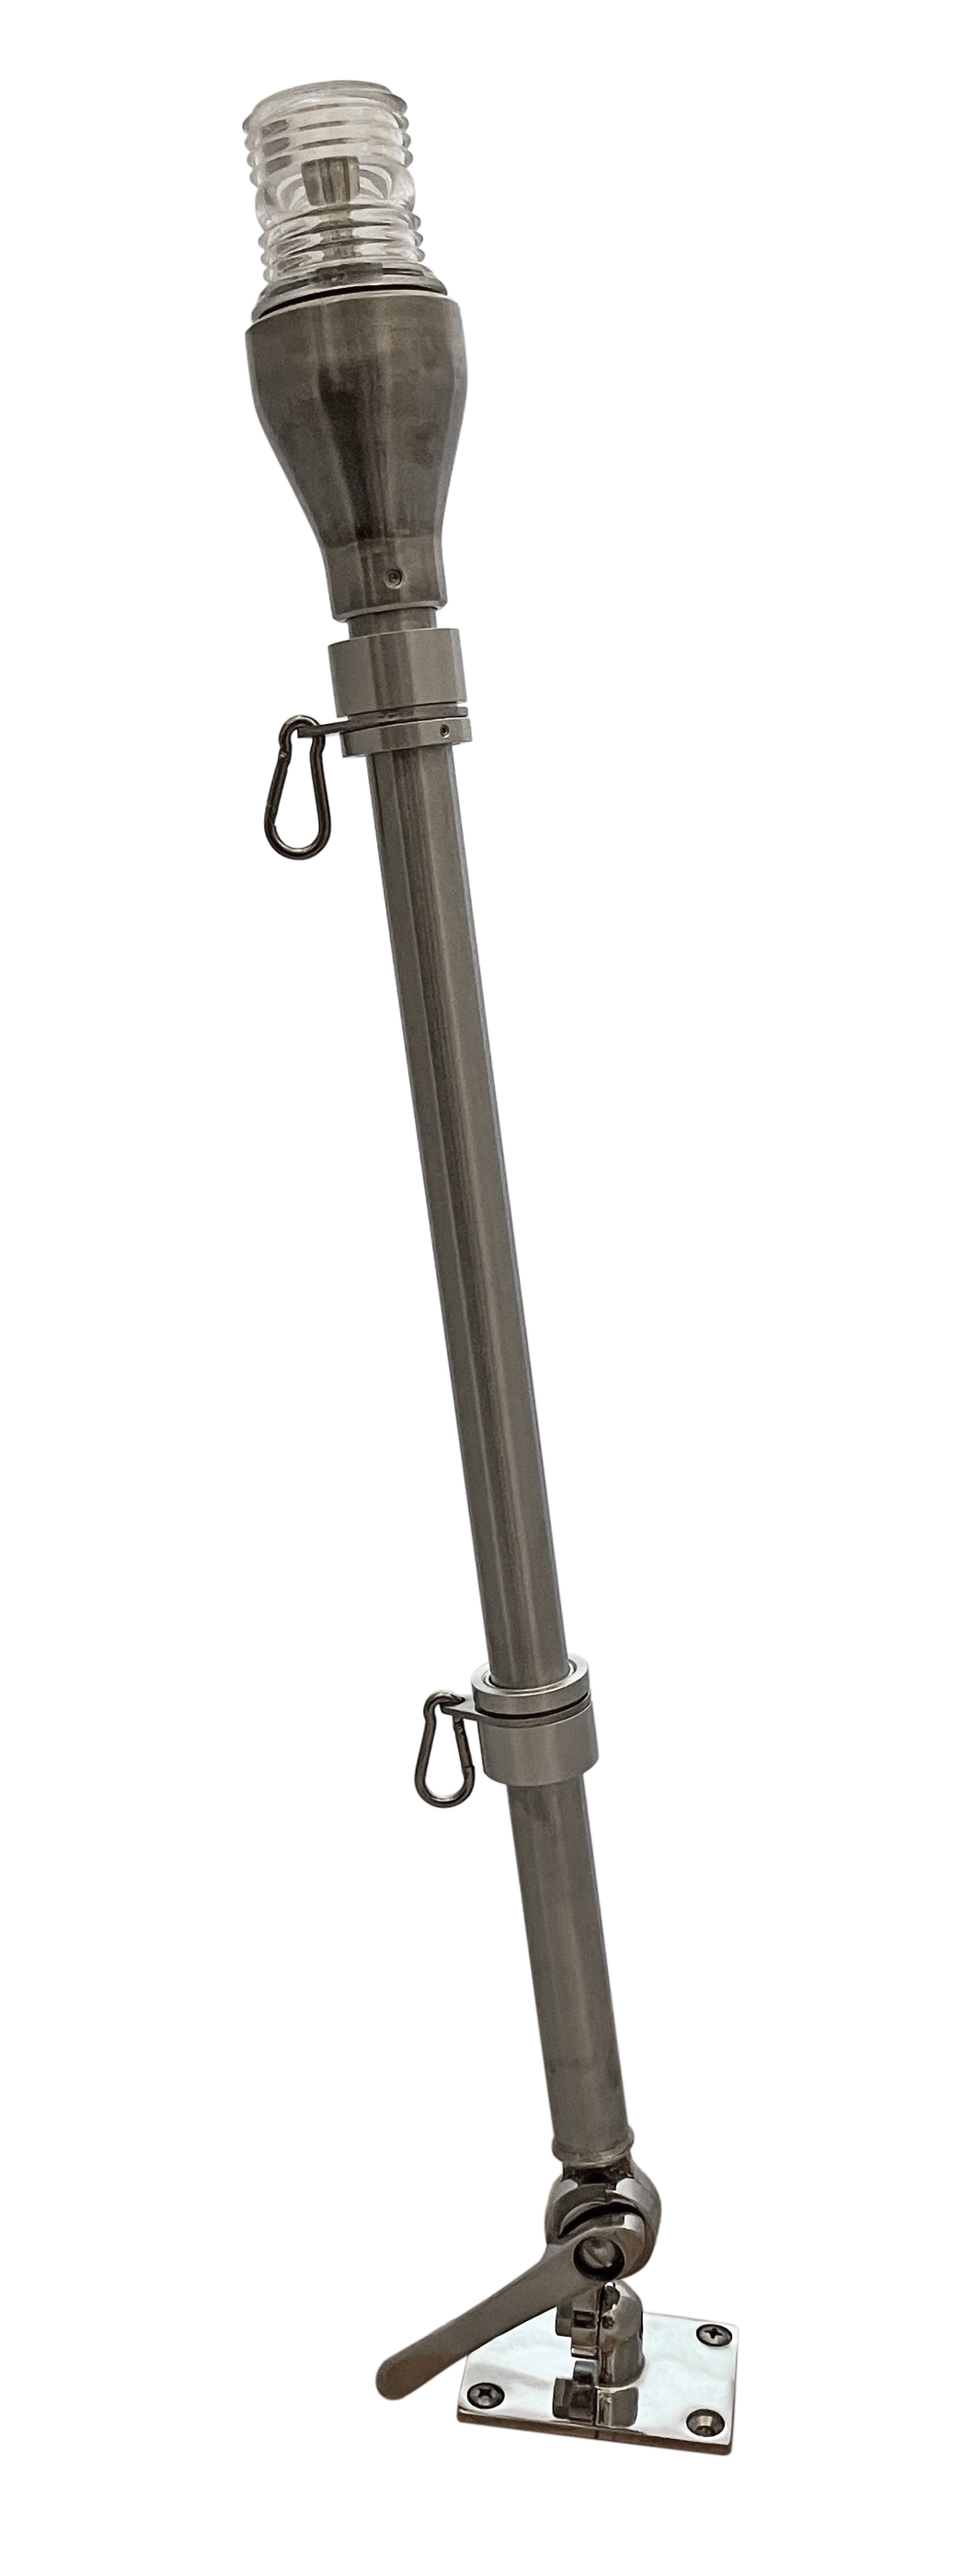 Woody Light Stanchion Flag Pole, Heavy Duty, 316 Stainless Steel